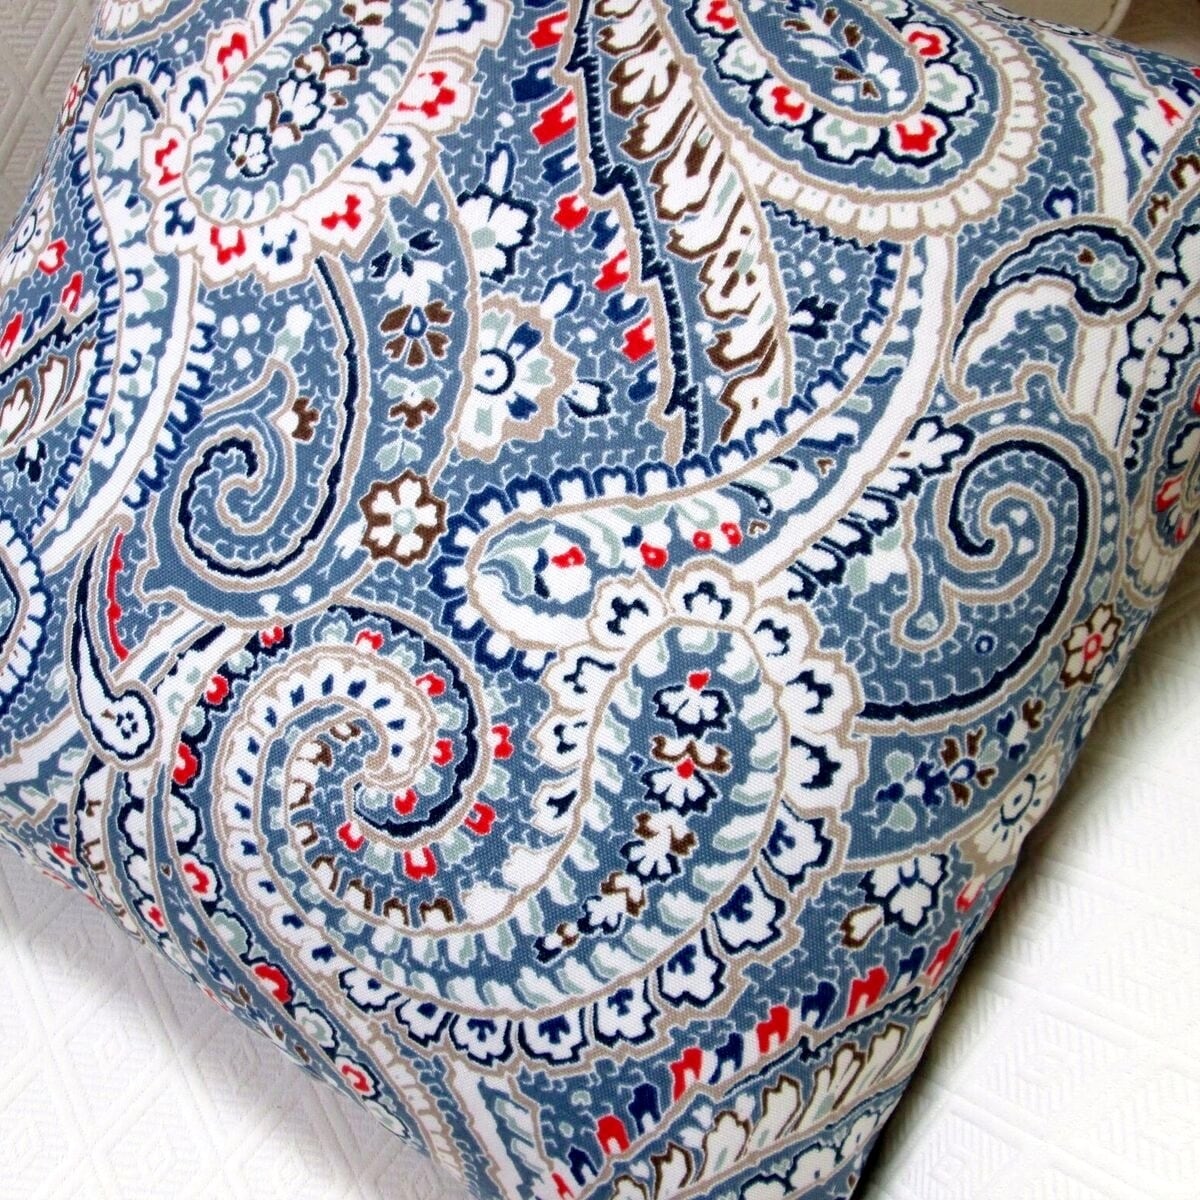 Artisan Pillows 18-inch Indoor/Outdoor Geometric Paisley in Blue Red - Pillow Cover Only (Set of 2)